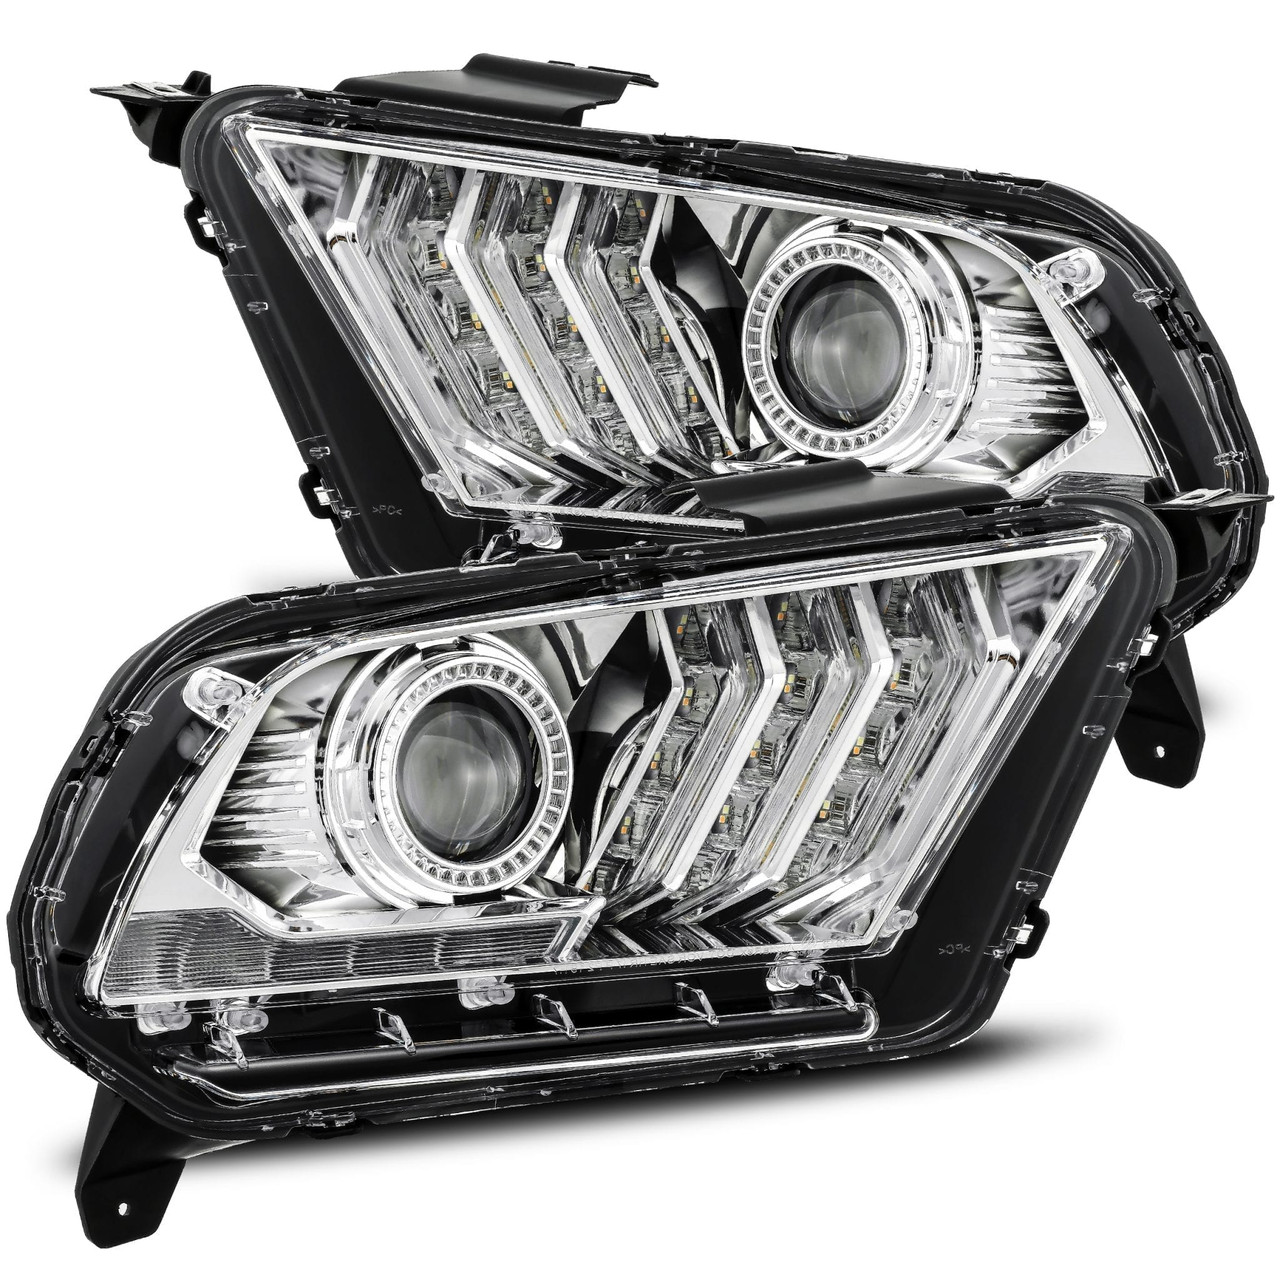  Alpharex LUXX-Series LED Projector Headlights Chrome for 2010 to 2012 Ford Mustang (880117)Main View